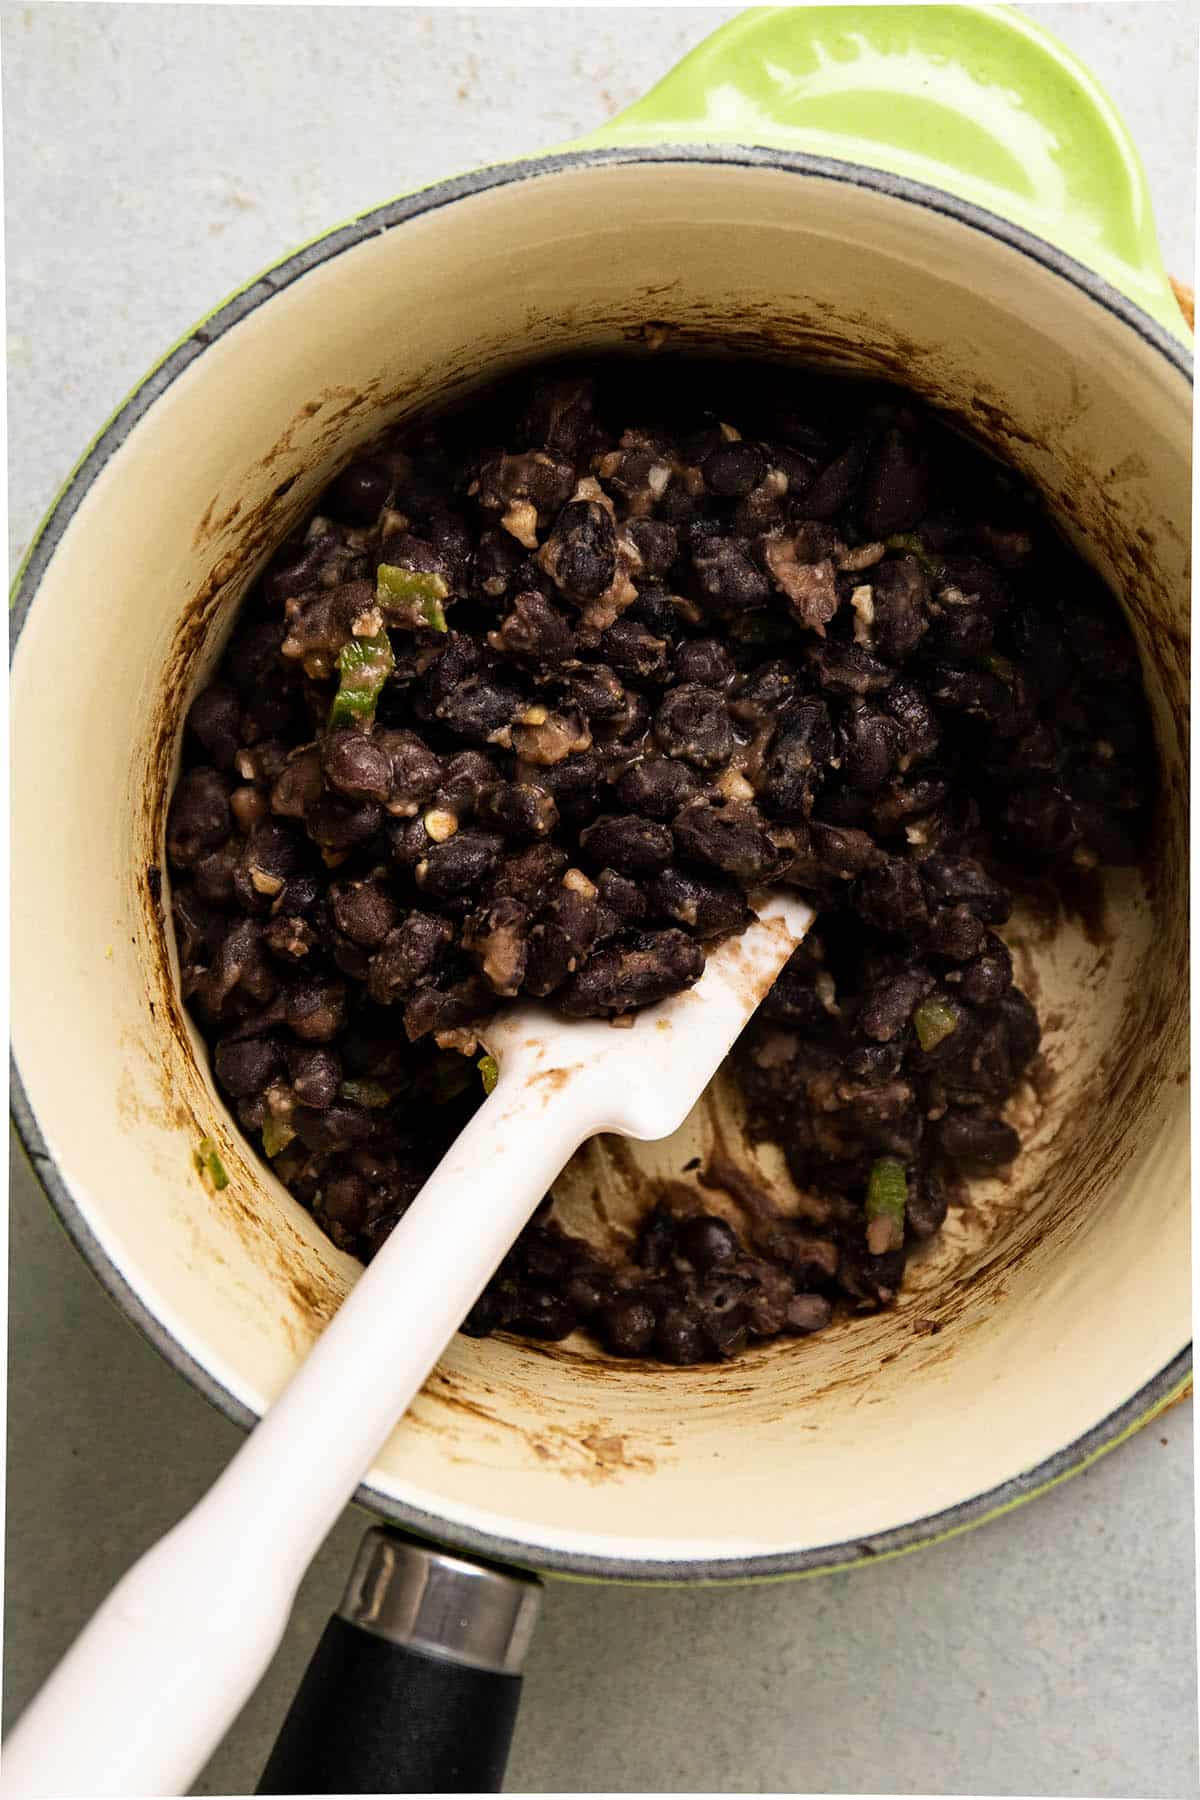 White spatula stirring cooked black beans in a small pot.